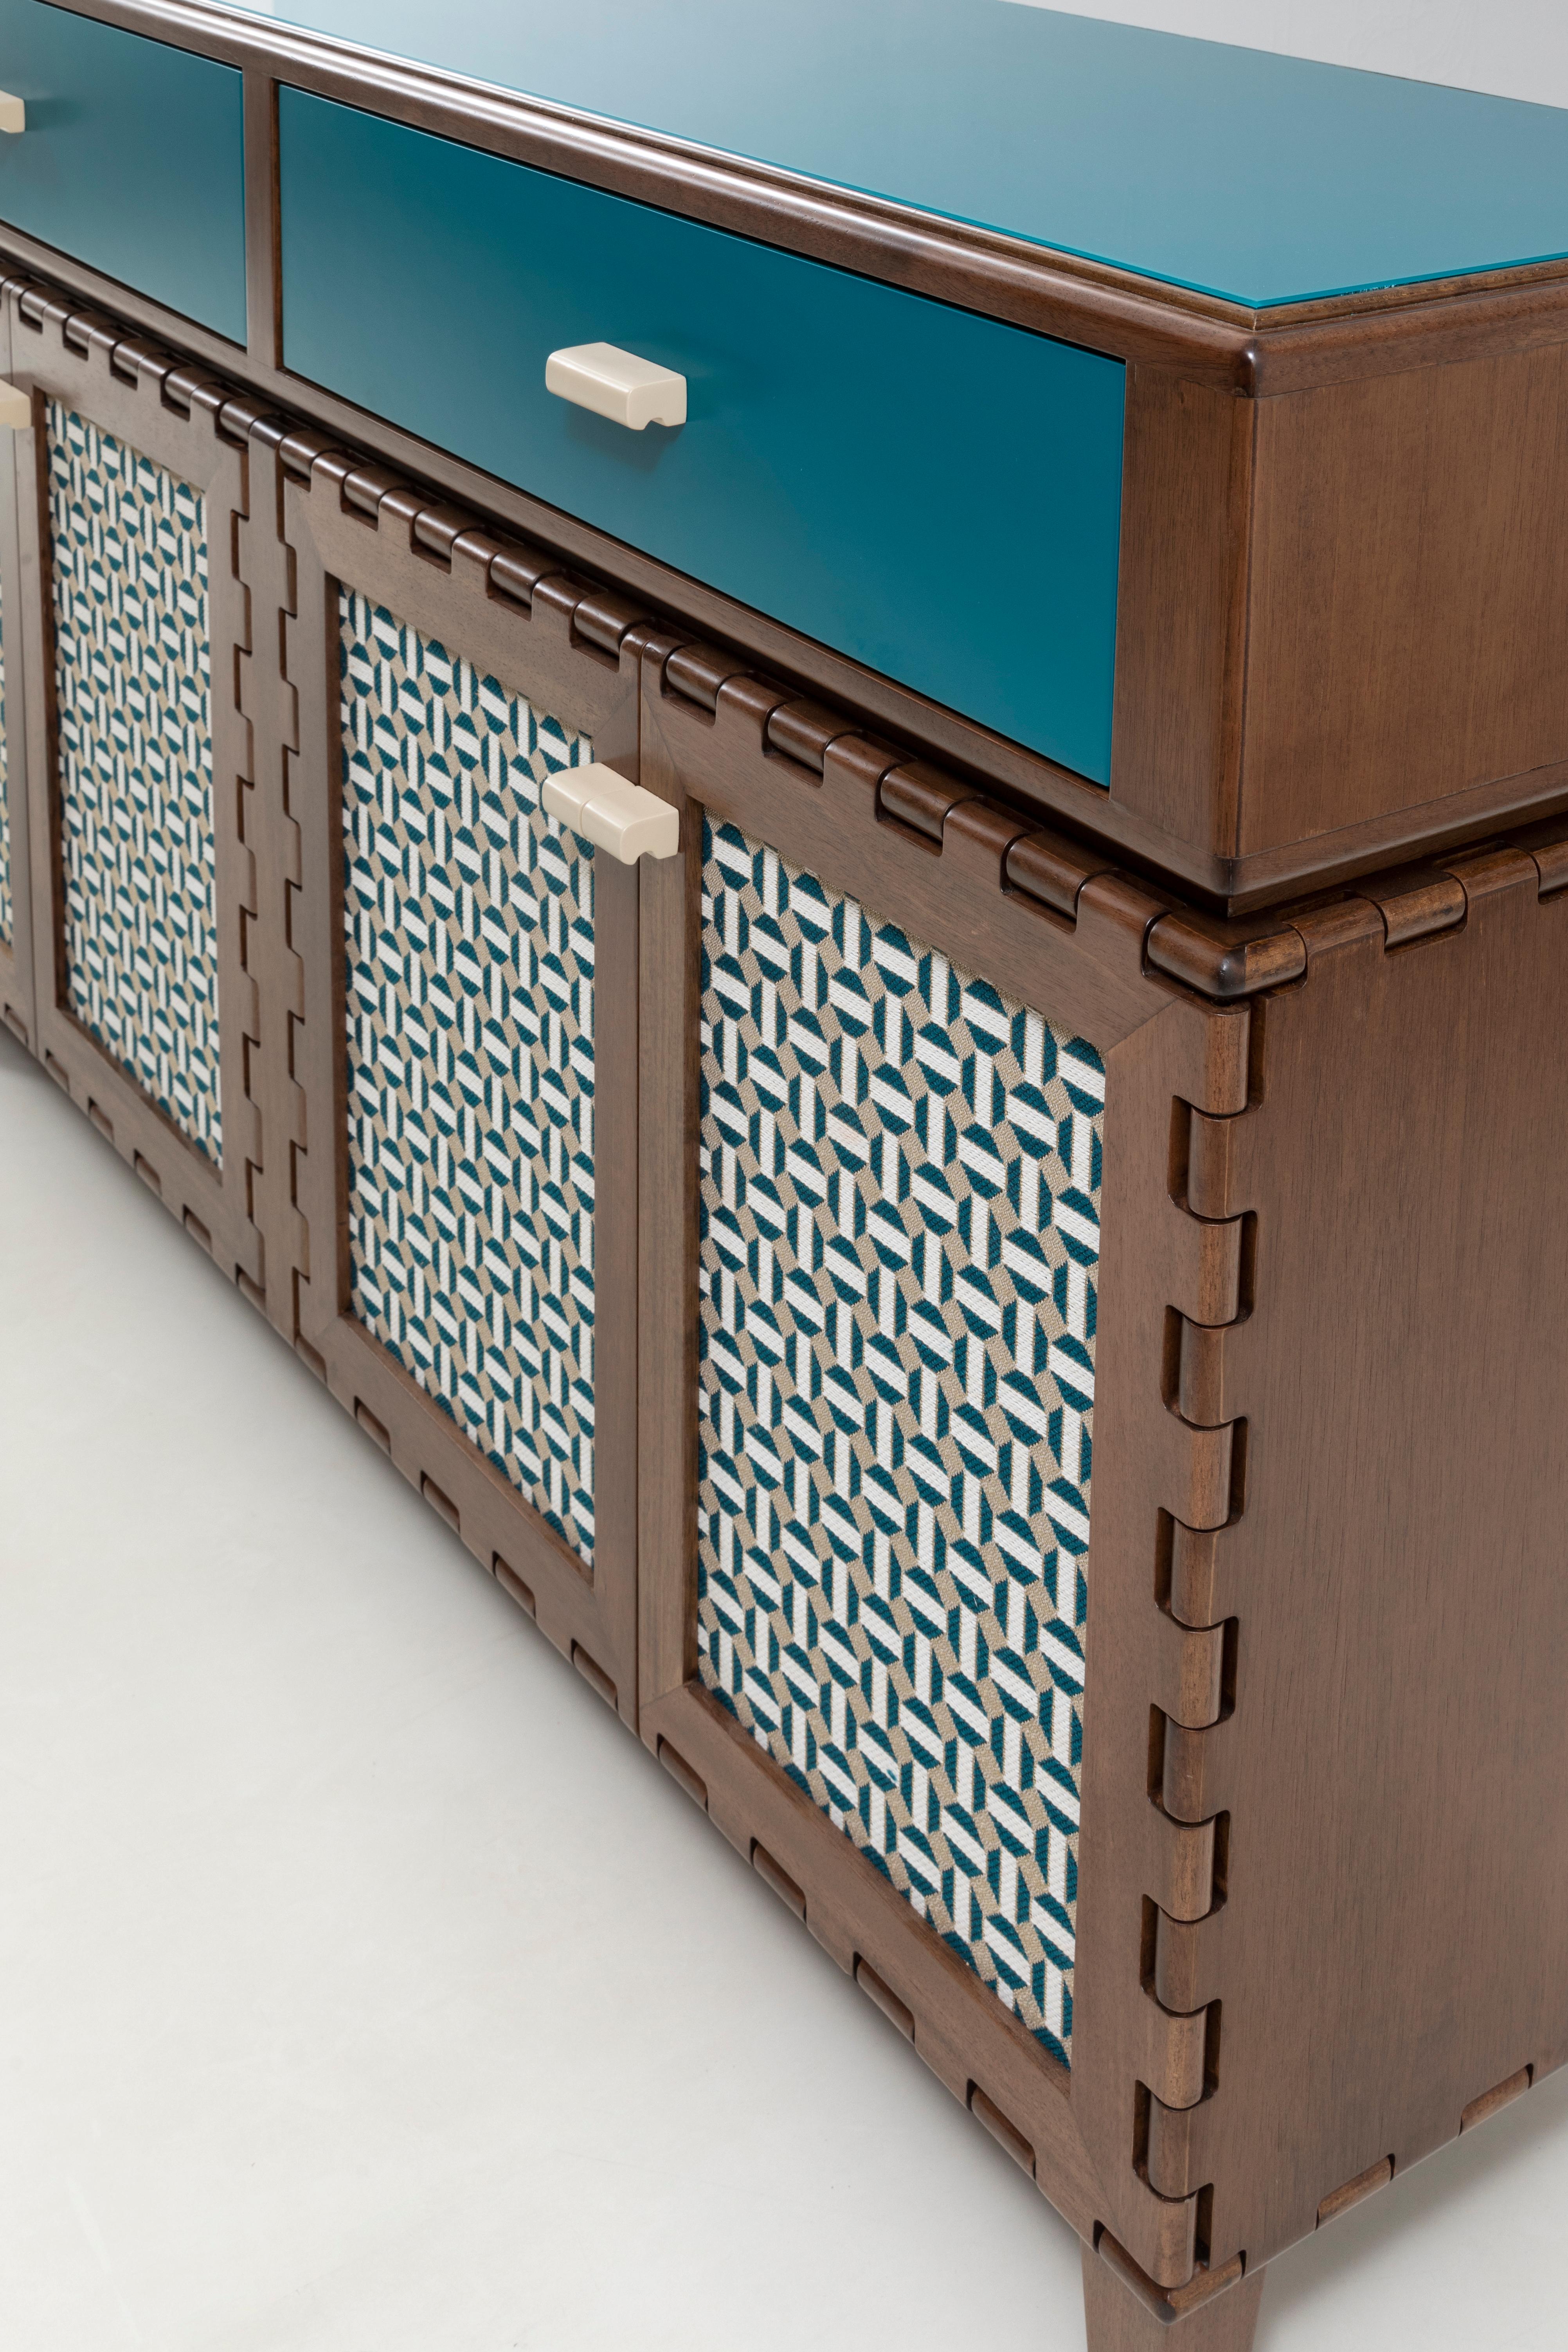 Handcrafted sideboard cabinet in wood and lacquer with fabric inserts and blue glass top. The wood and lacquer color highlights the simplicity of the design details and framed the richness of the fabric's pattern. The modular quality of the